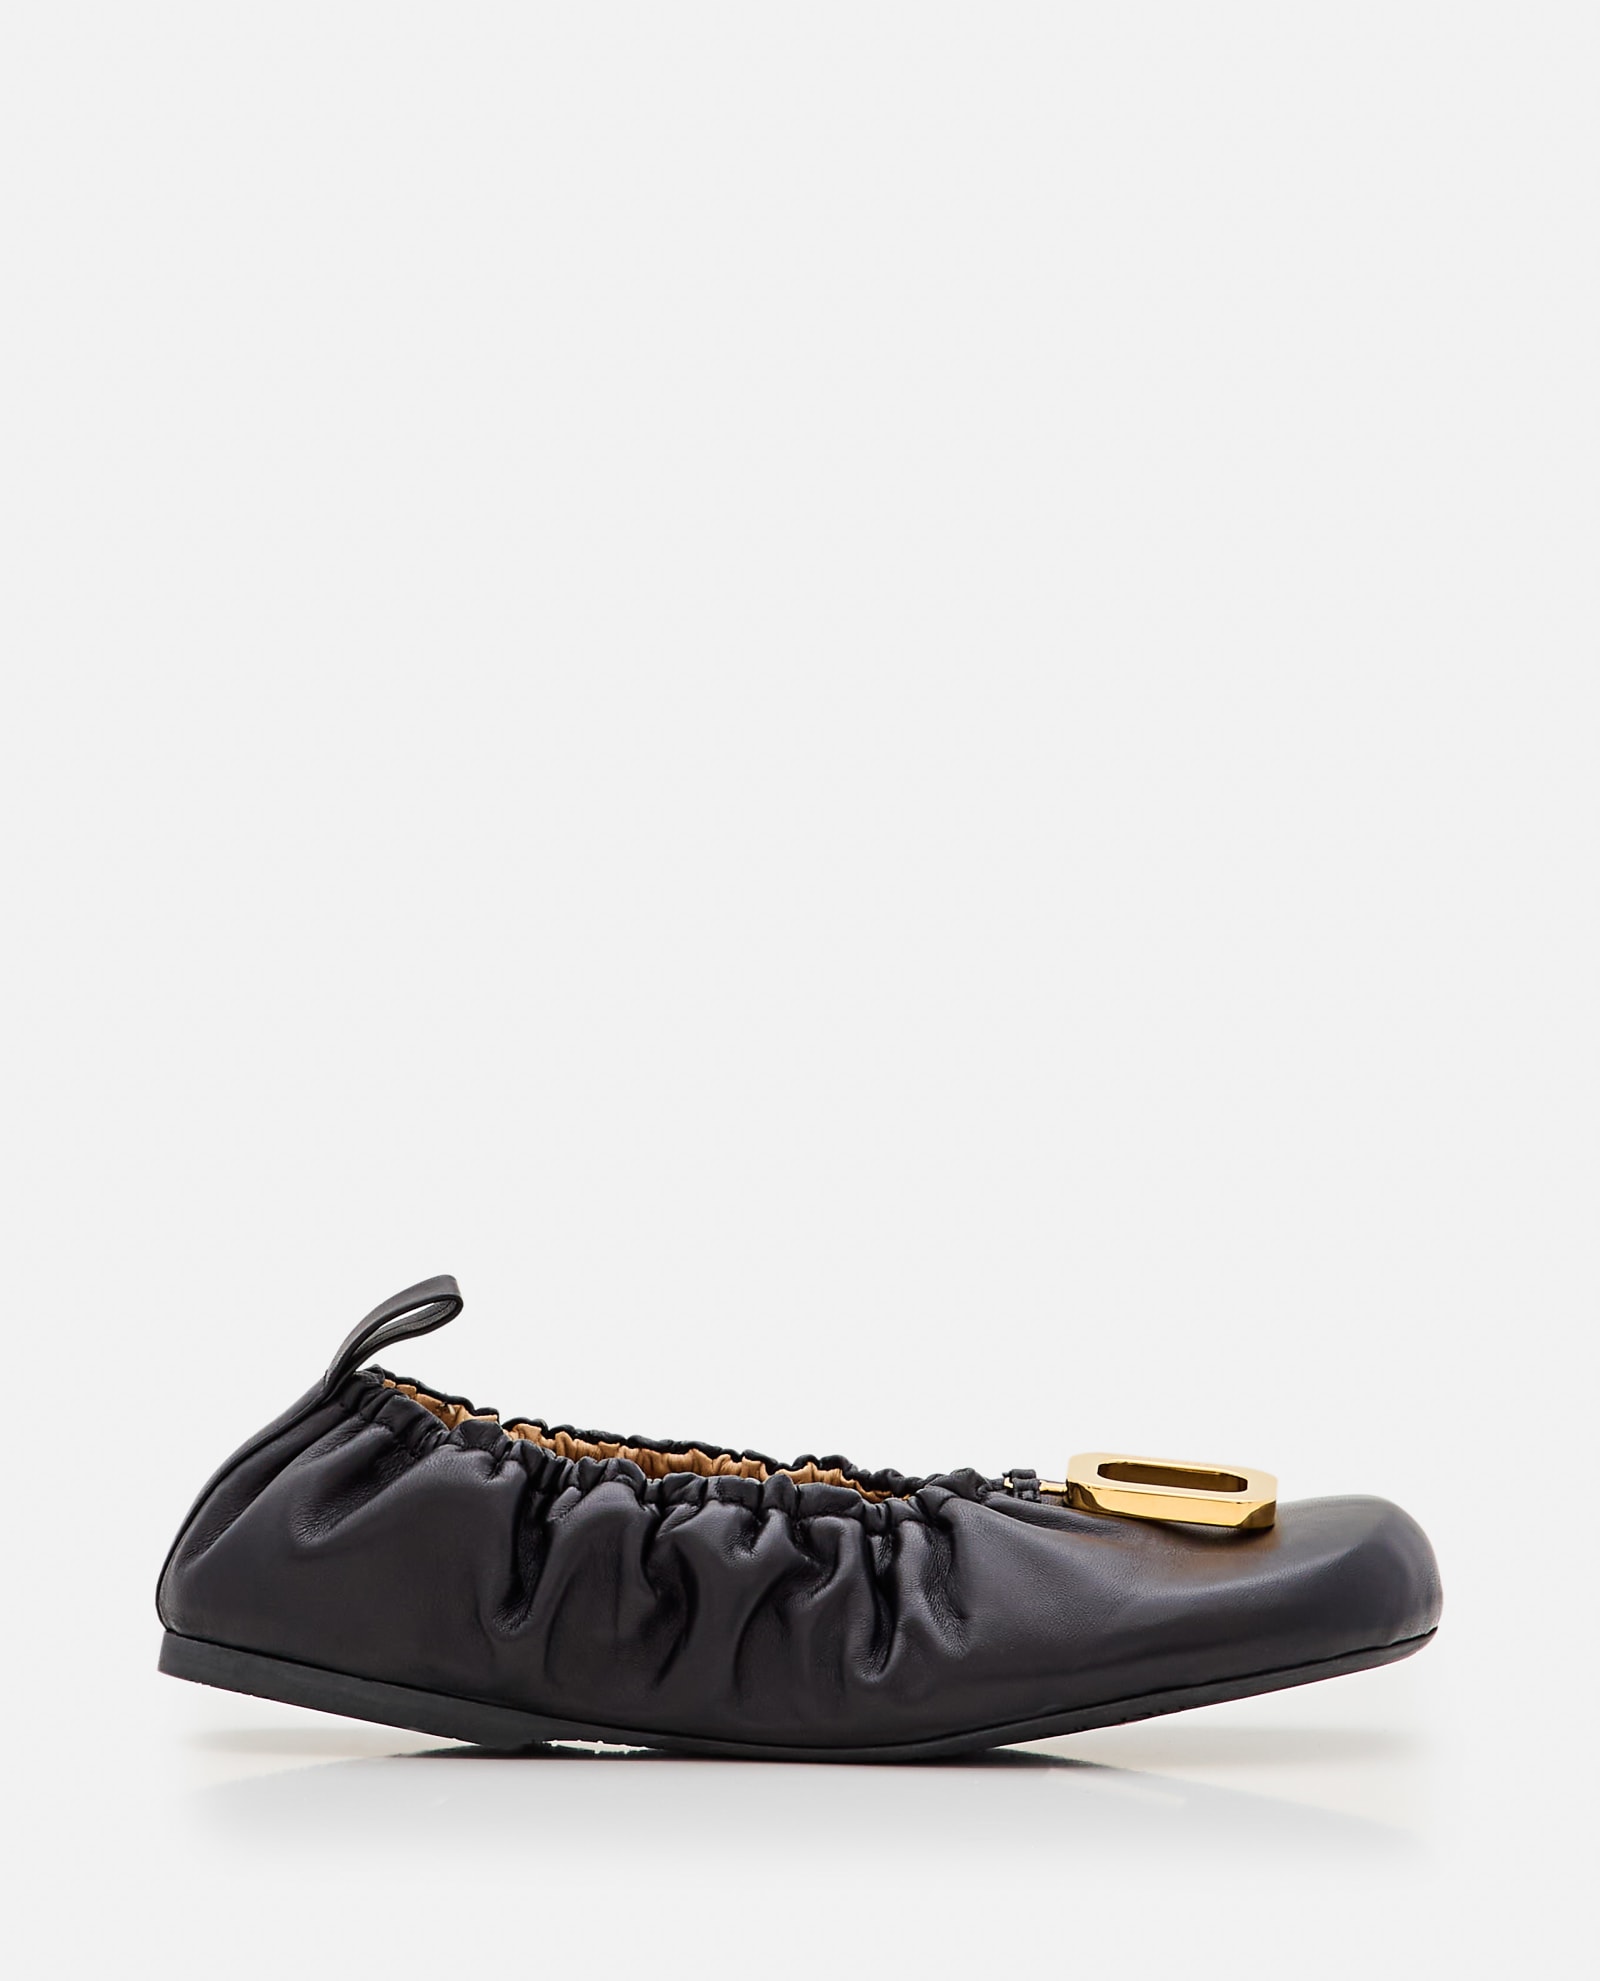 JW ANDERSON LEATHER BALLET FLATS